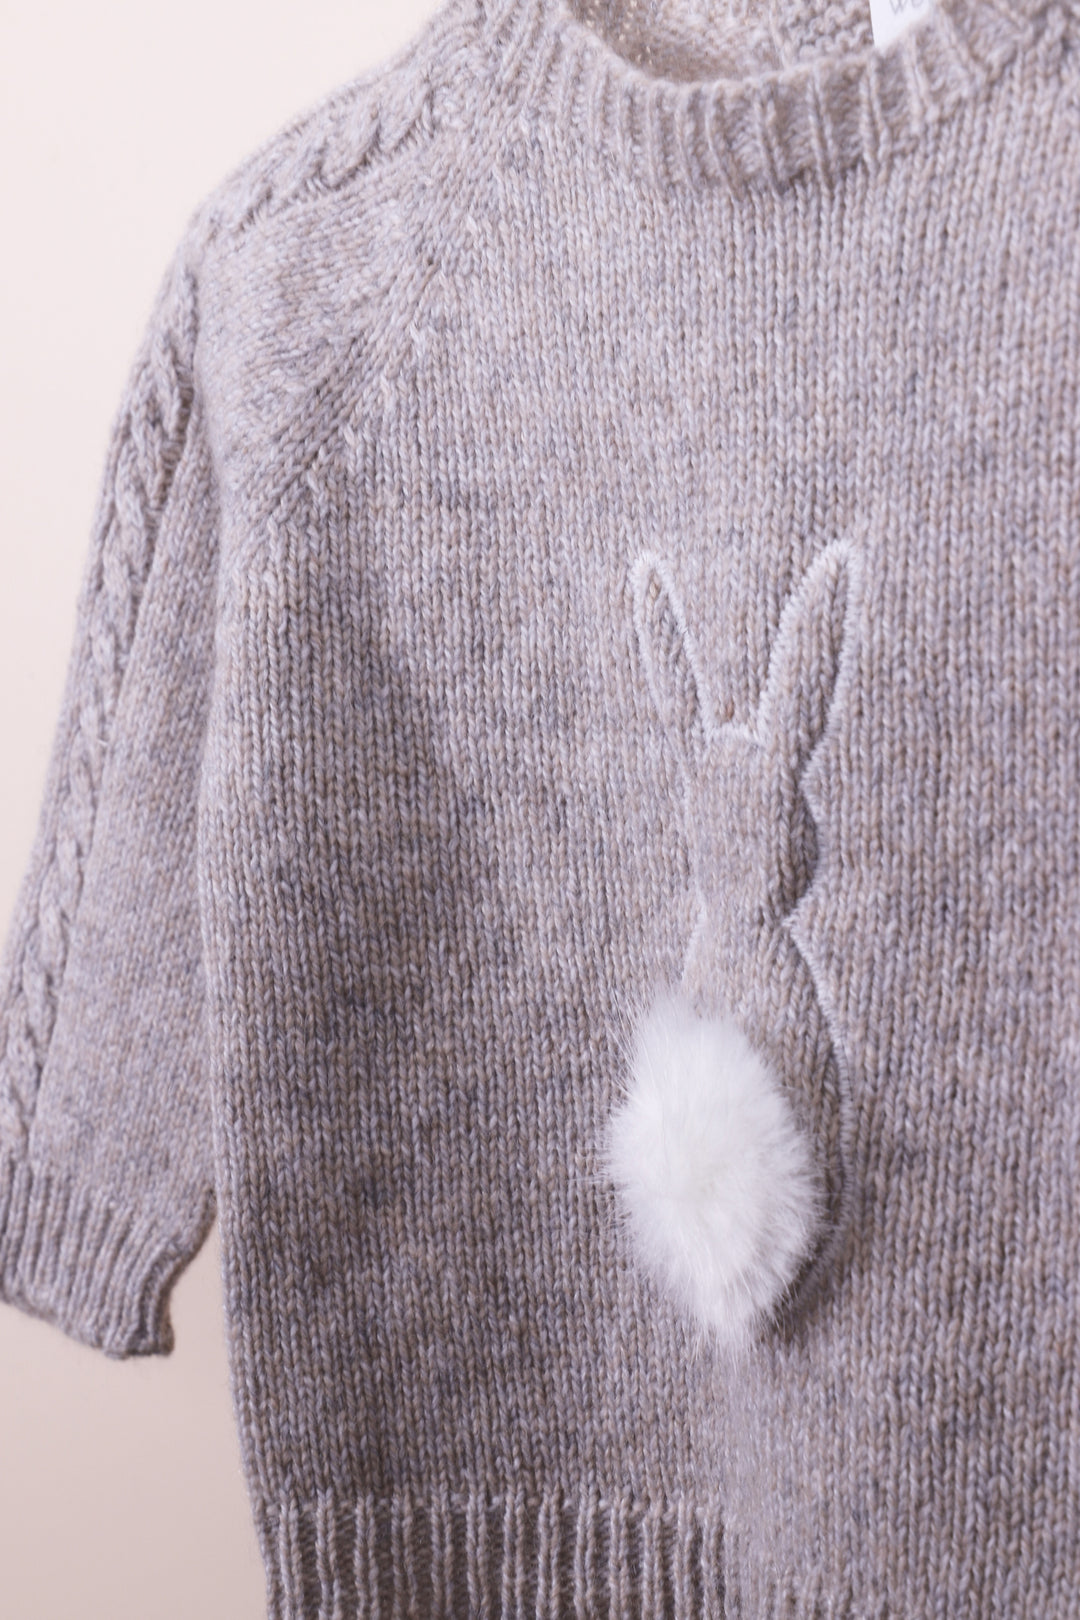 Wedoble "Cloud" Cashmere Bunny Top & Leggings | Millie and John